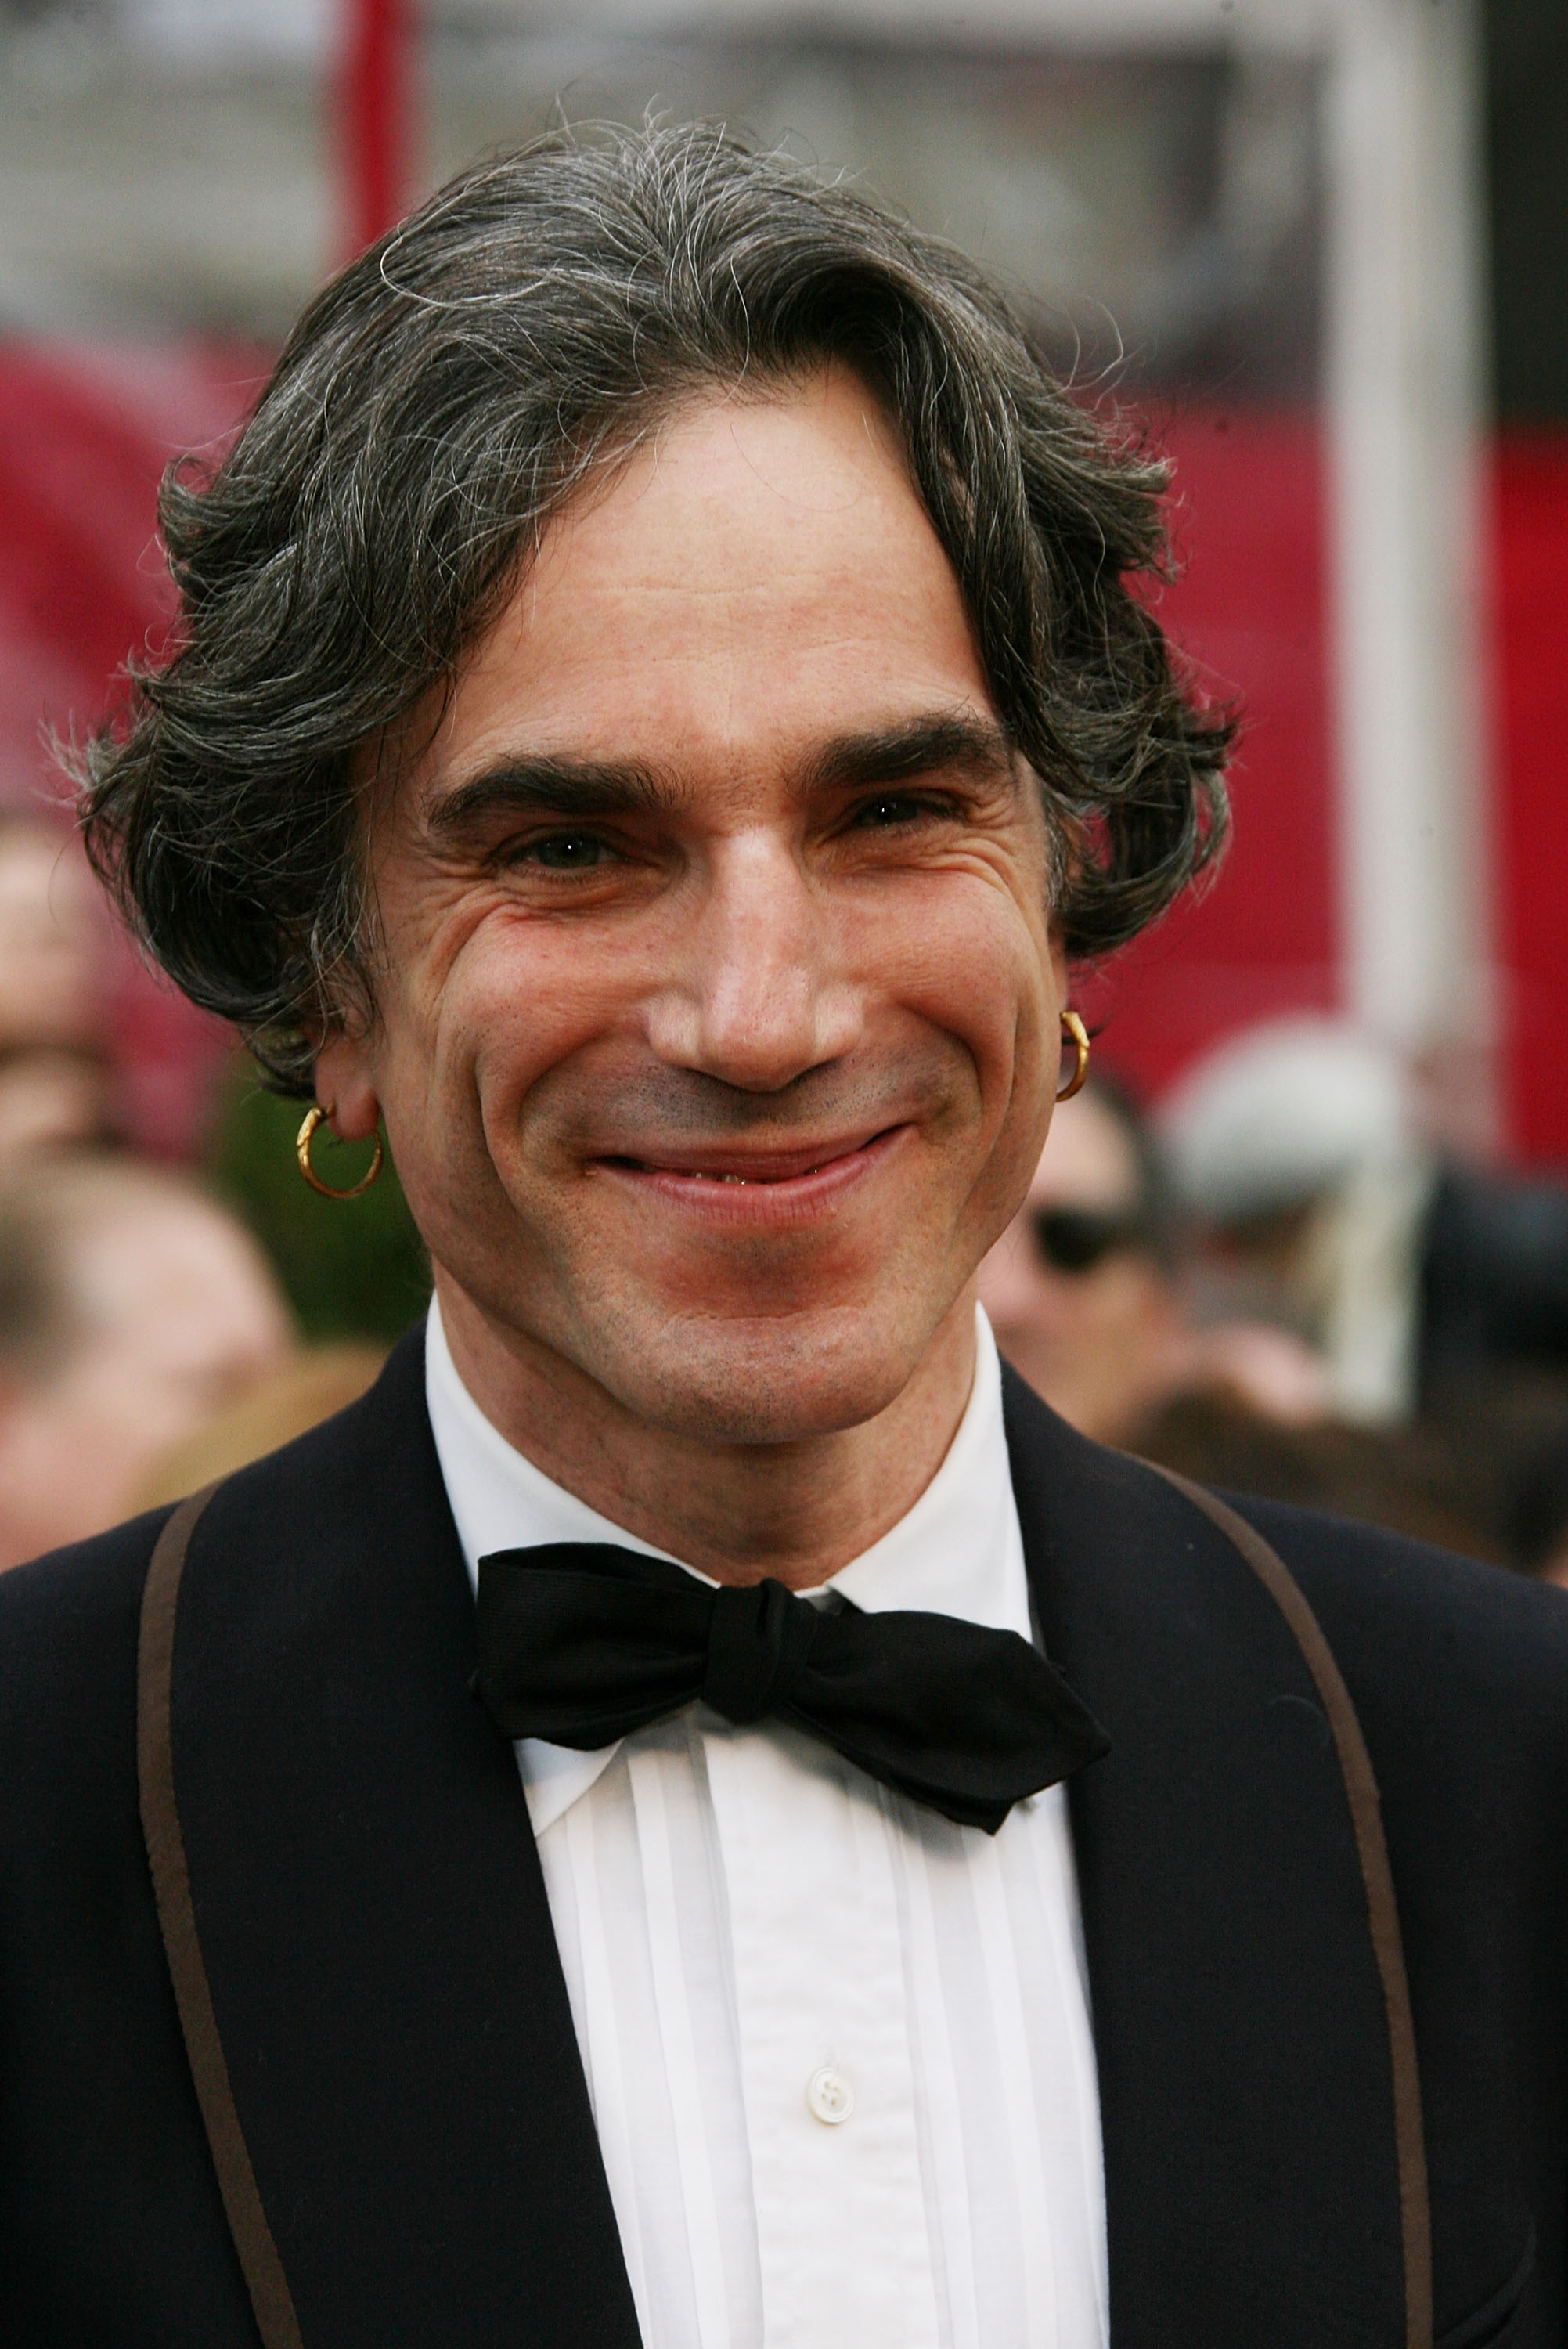 Daniel Day-Lewis arriving at the 80th Annual Academy Awards at the Kodak Theatre on February 24, 2008. | Source: Getty Images